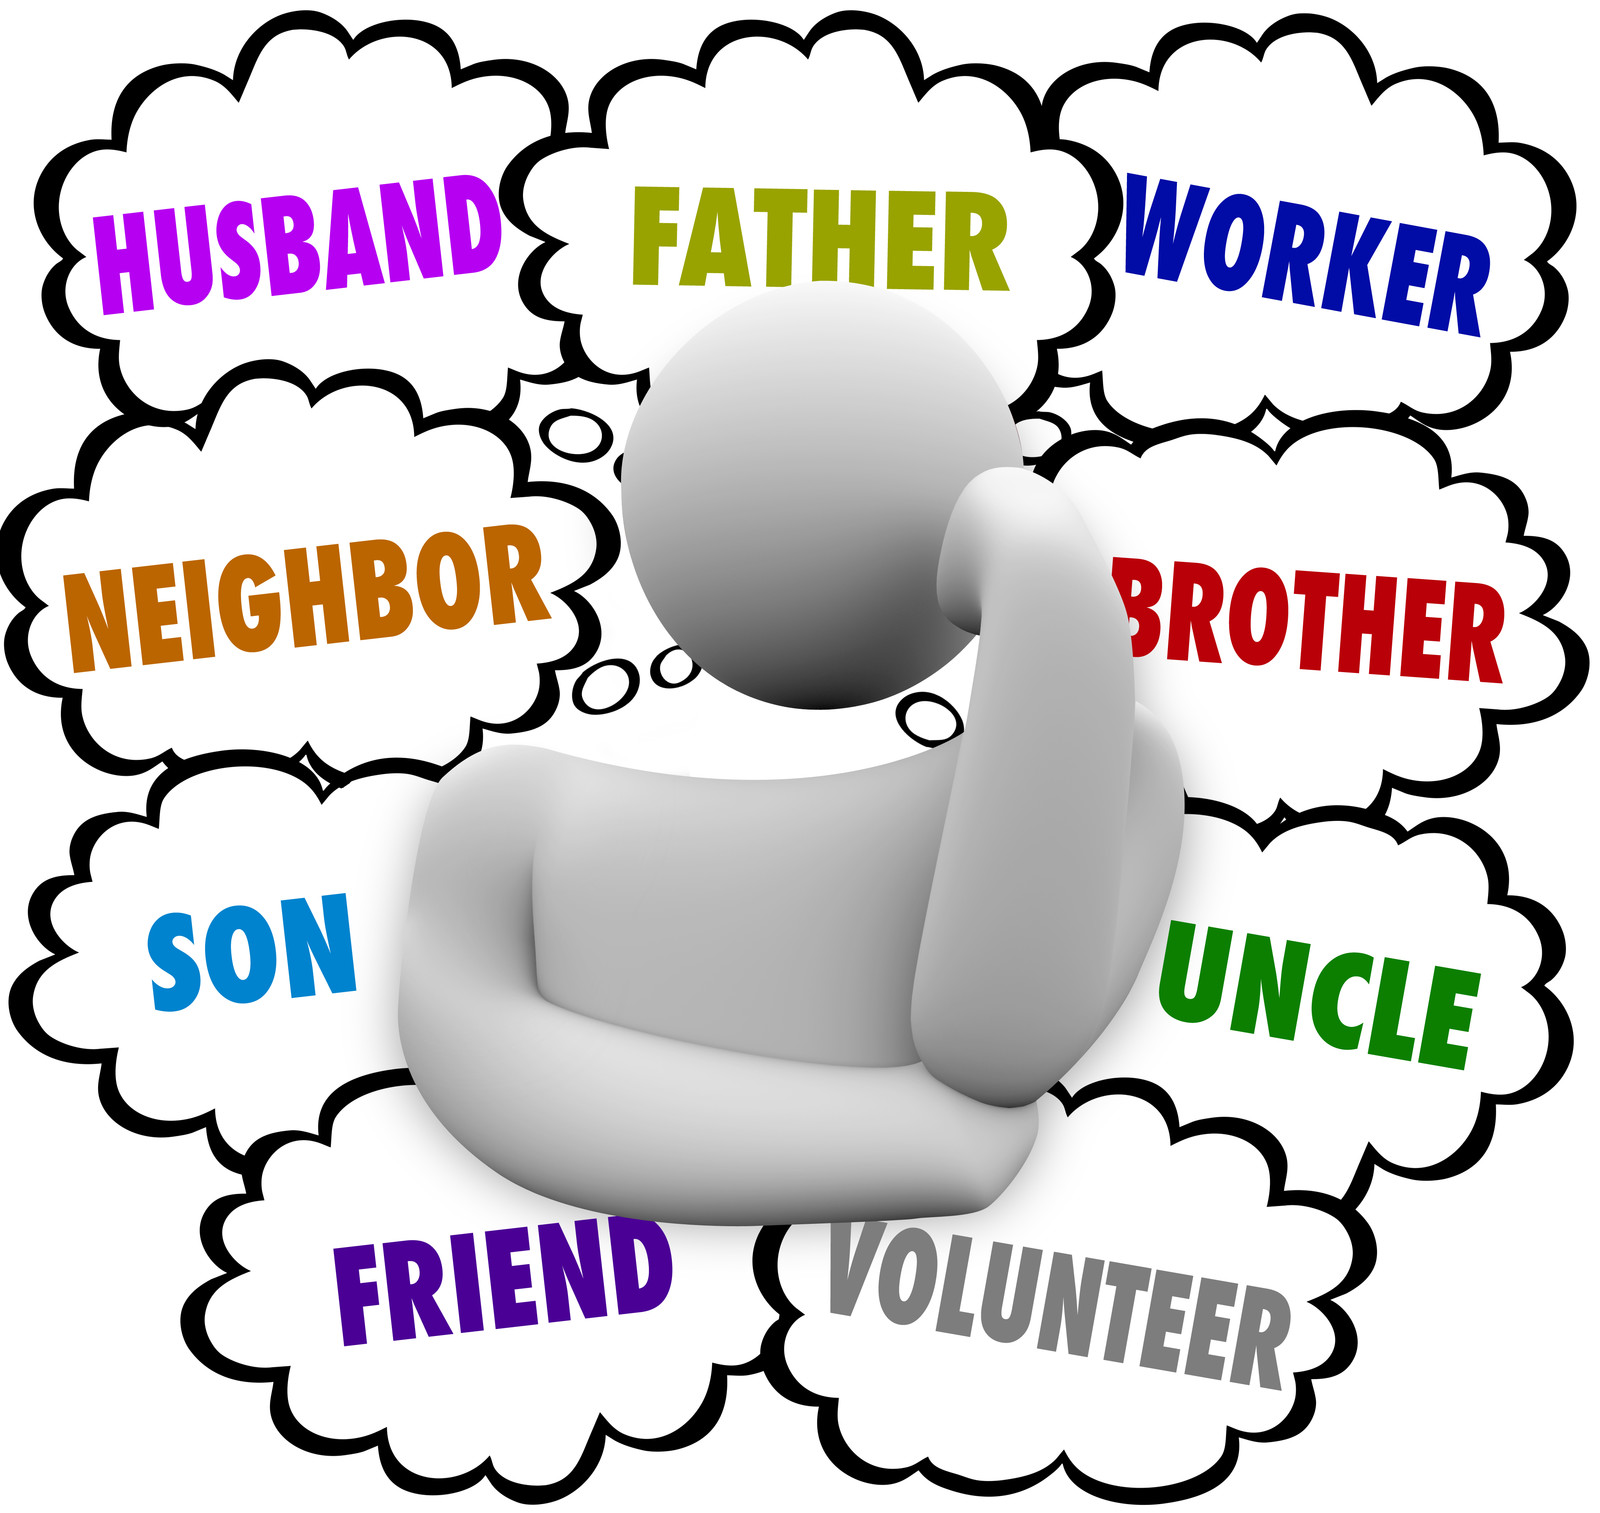 word cloud with roles a man plays in life including father, husband, brother, worker, uncle, volunteer, friend, neighbour, husband and son